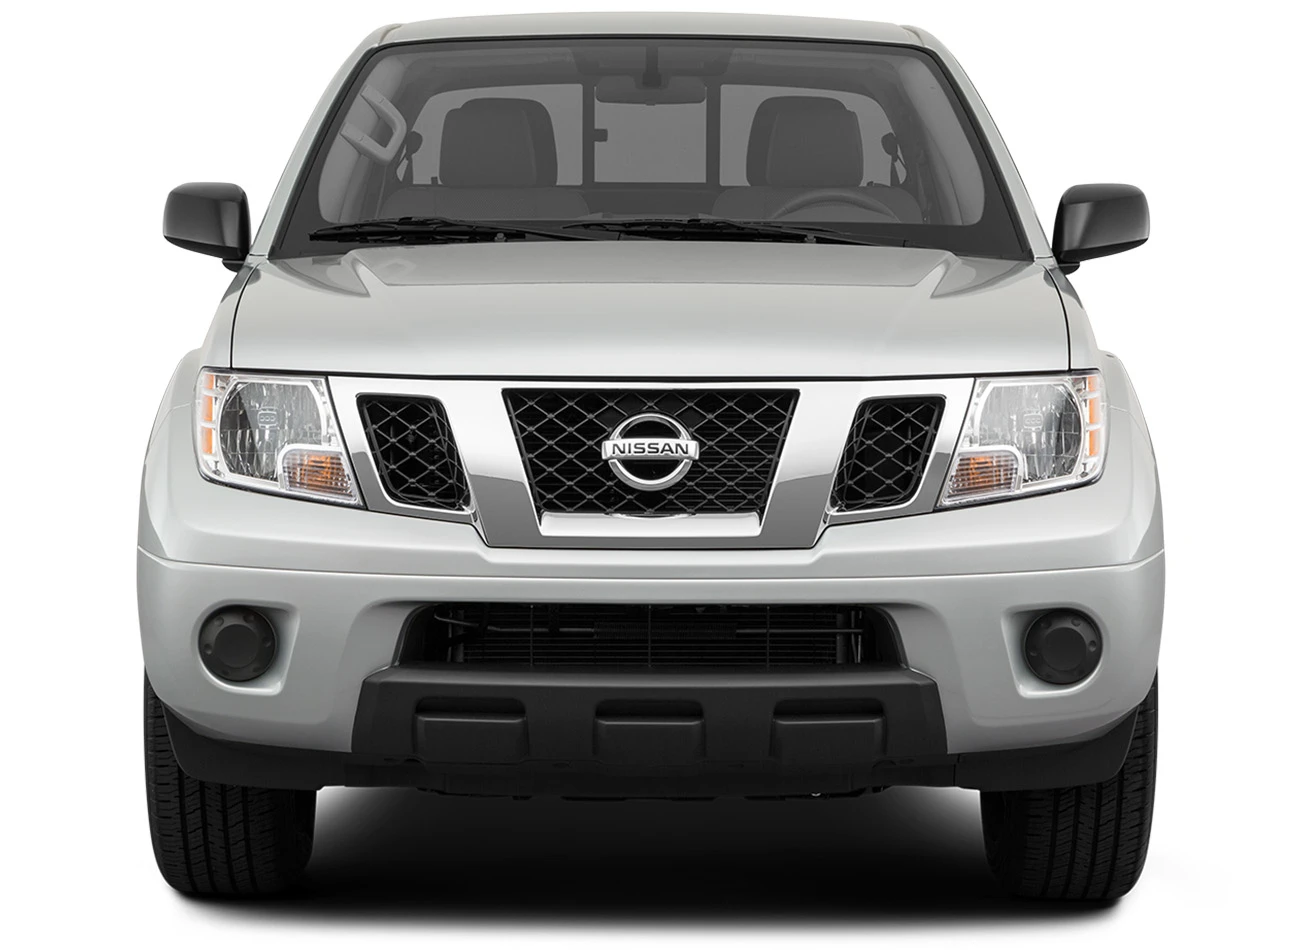  2020 Nissan Frontier: Exterior front view | CarMax